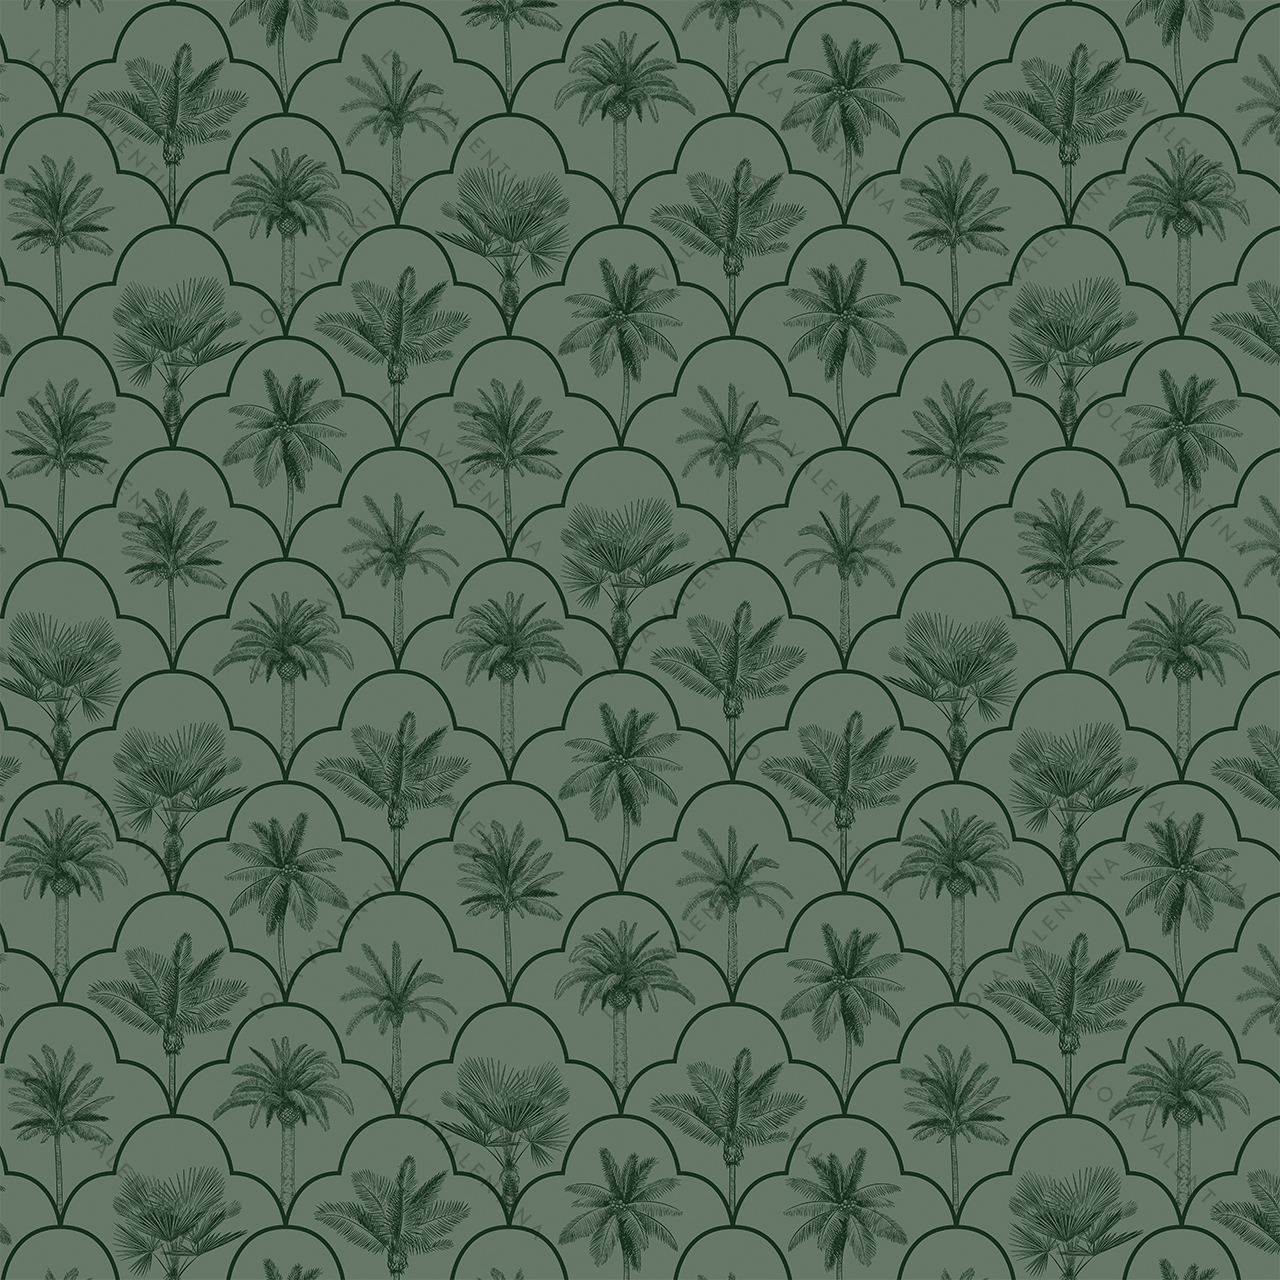 Brunswick-Biscayne-Pattern-30x30-From-Deco-Collection-Lola-Valentina-High-End-Linen-Rental